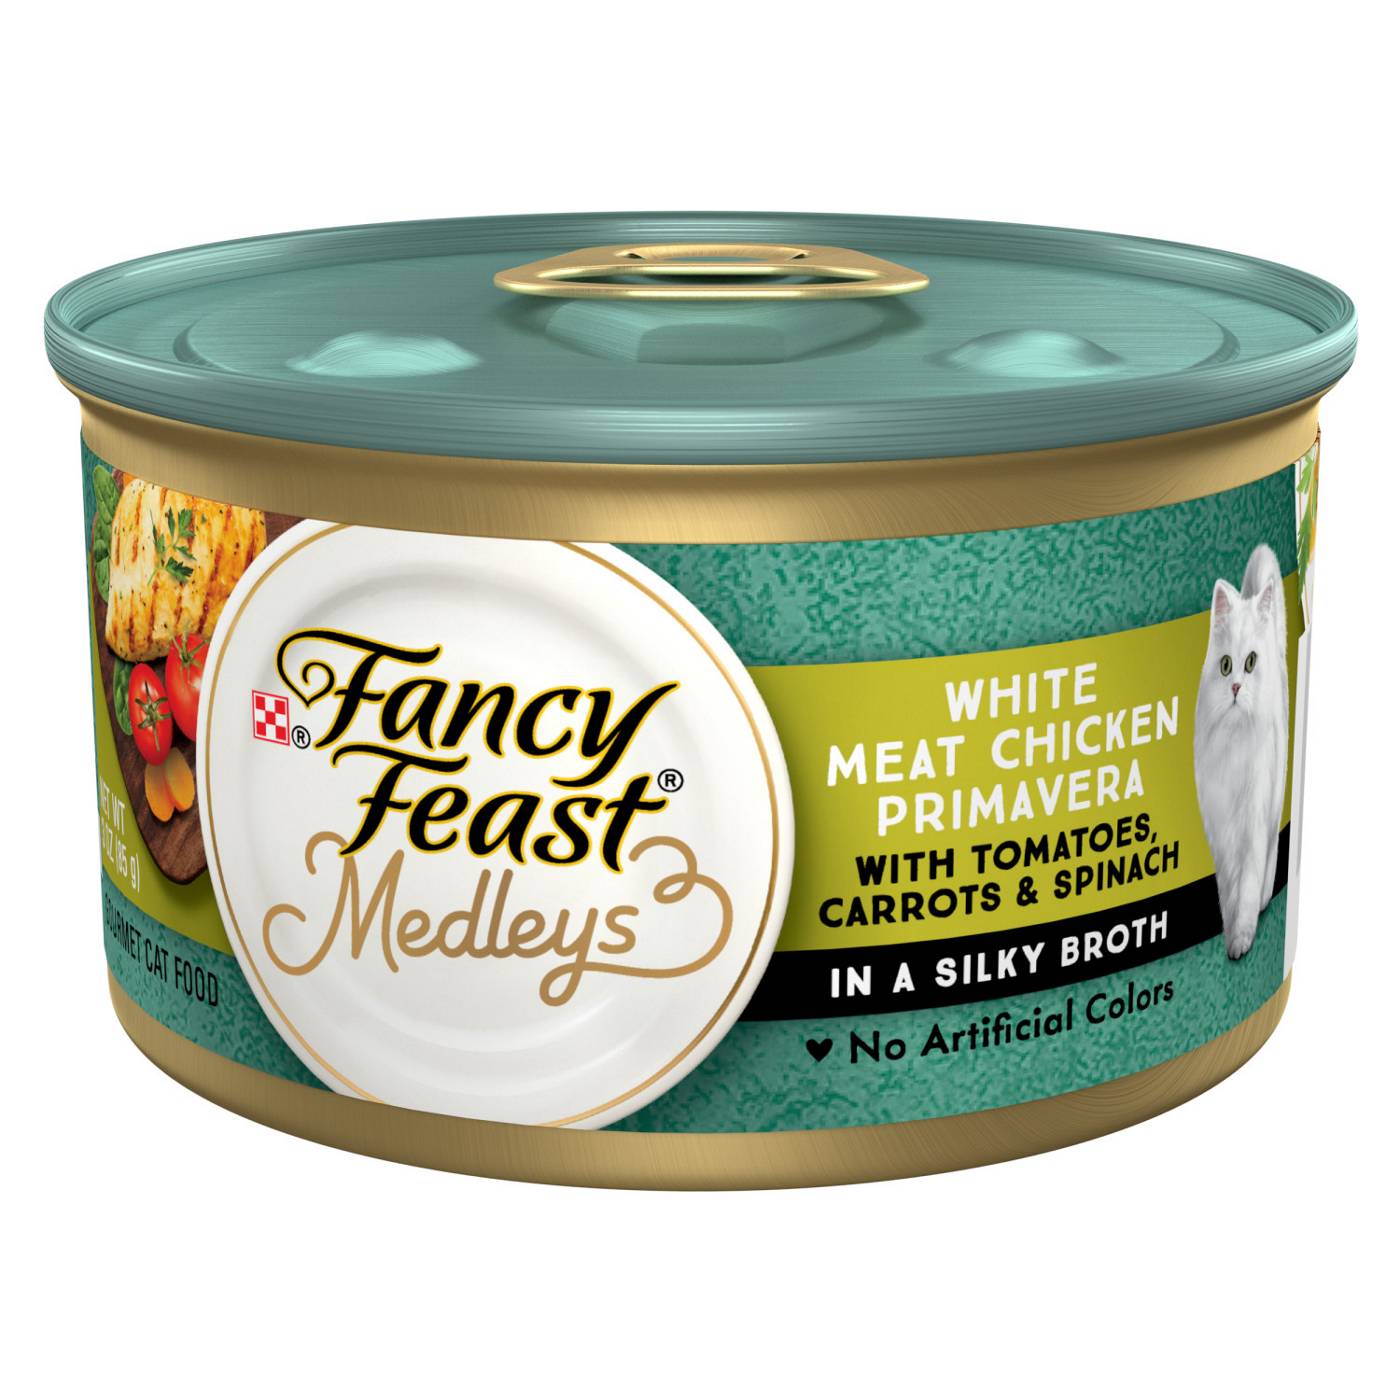 Fancy Feast Purina Fancy Feast Medleys White Meat Chicken Primavera With Tomatoes, Carrots and Spinach in a Silky Broth; image 1 of 5